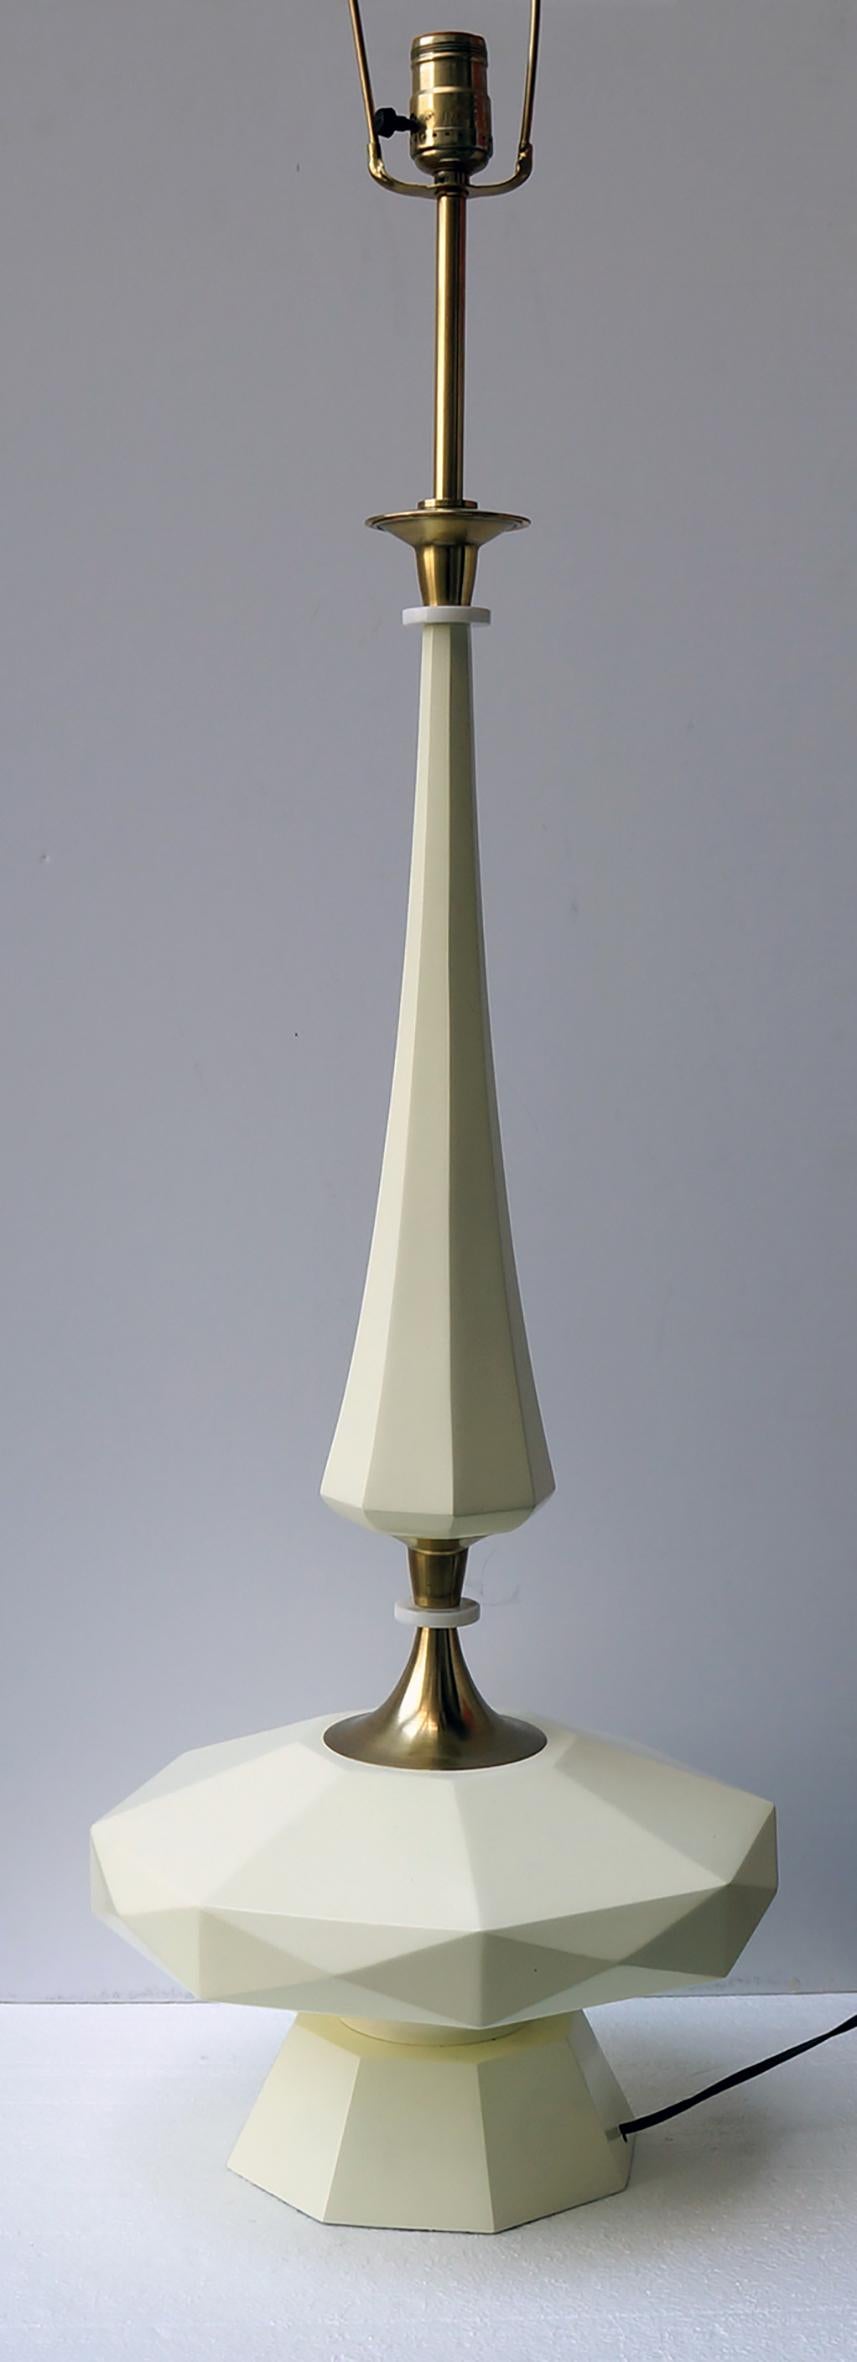 Walnut Table Lamp Mid-Century Modern Architectural Wood and Brass, 1950s